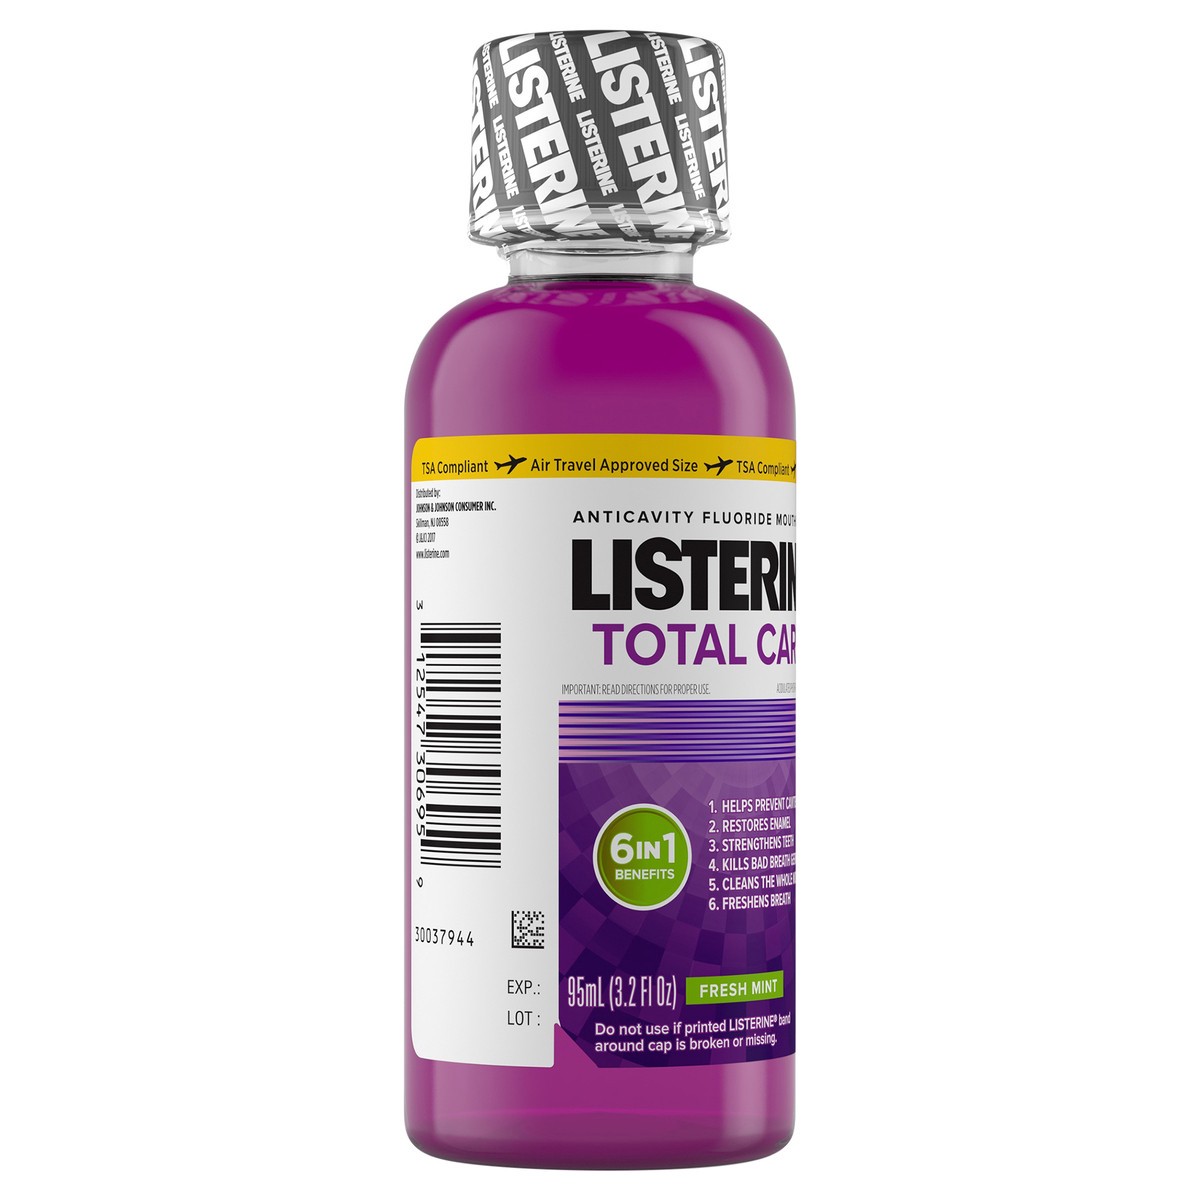 slide 7 of 11, Listerine Total Care Anticavity Fluoride Mouthwash, 6 Benefit Oral Rinse Kills 99% of Bad Breath Germs, Prevents Cavities, Strengthens Enamel, ADA-Accepted, Fresh Mint, Travel Size, 95 mL, 95 ml